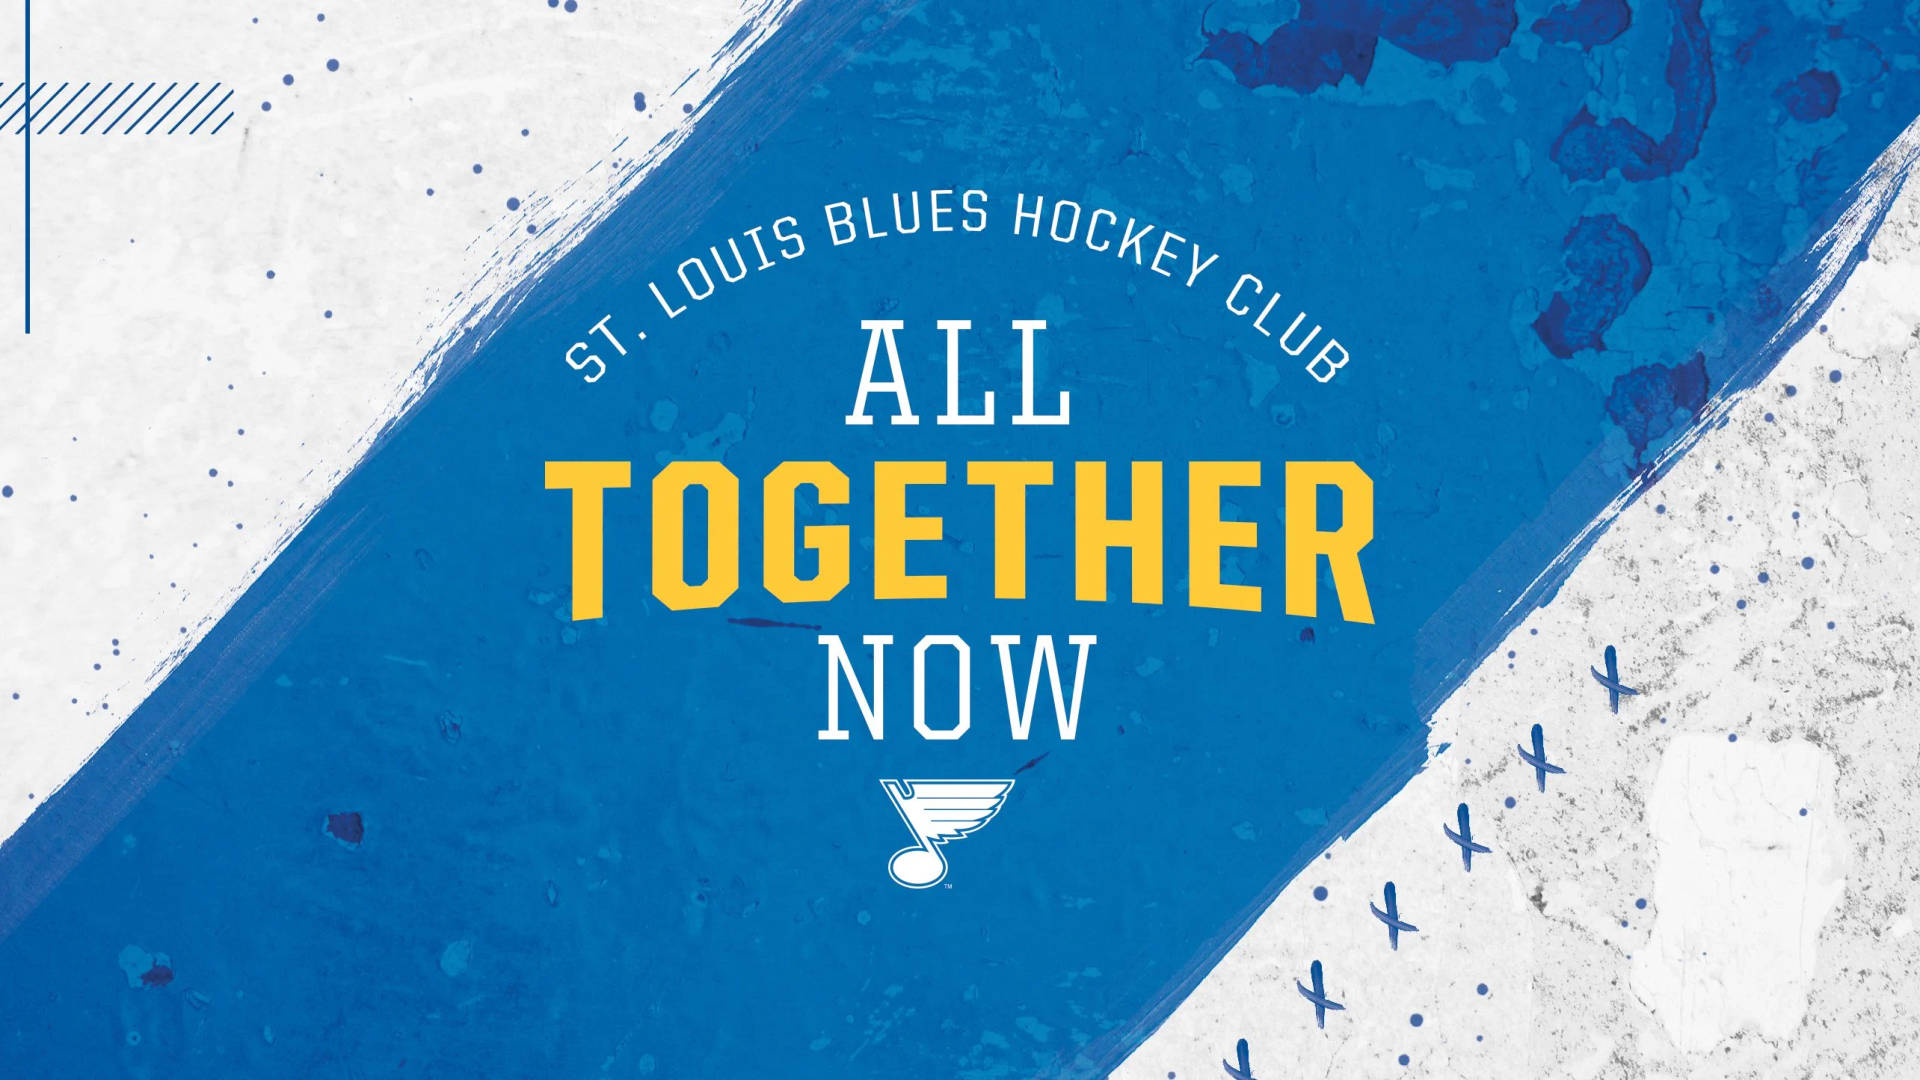 2568X1444 St Louis Blues Wallpaper and Background